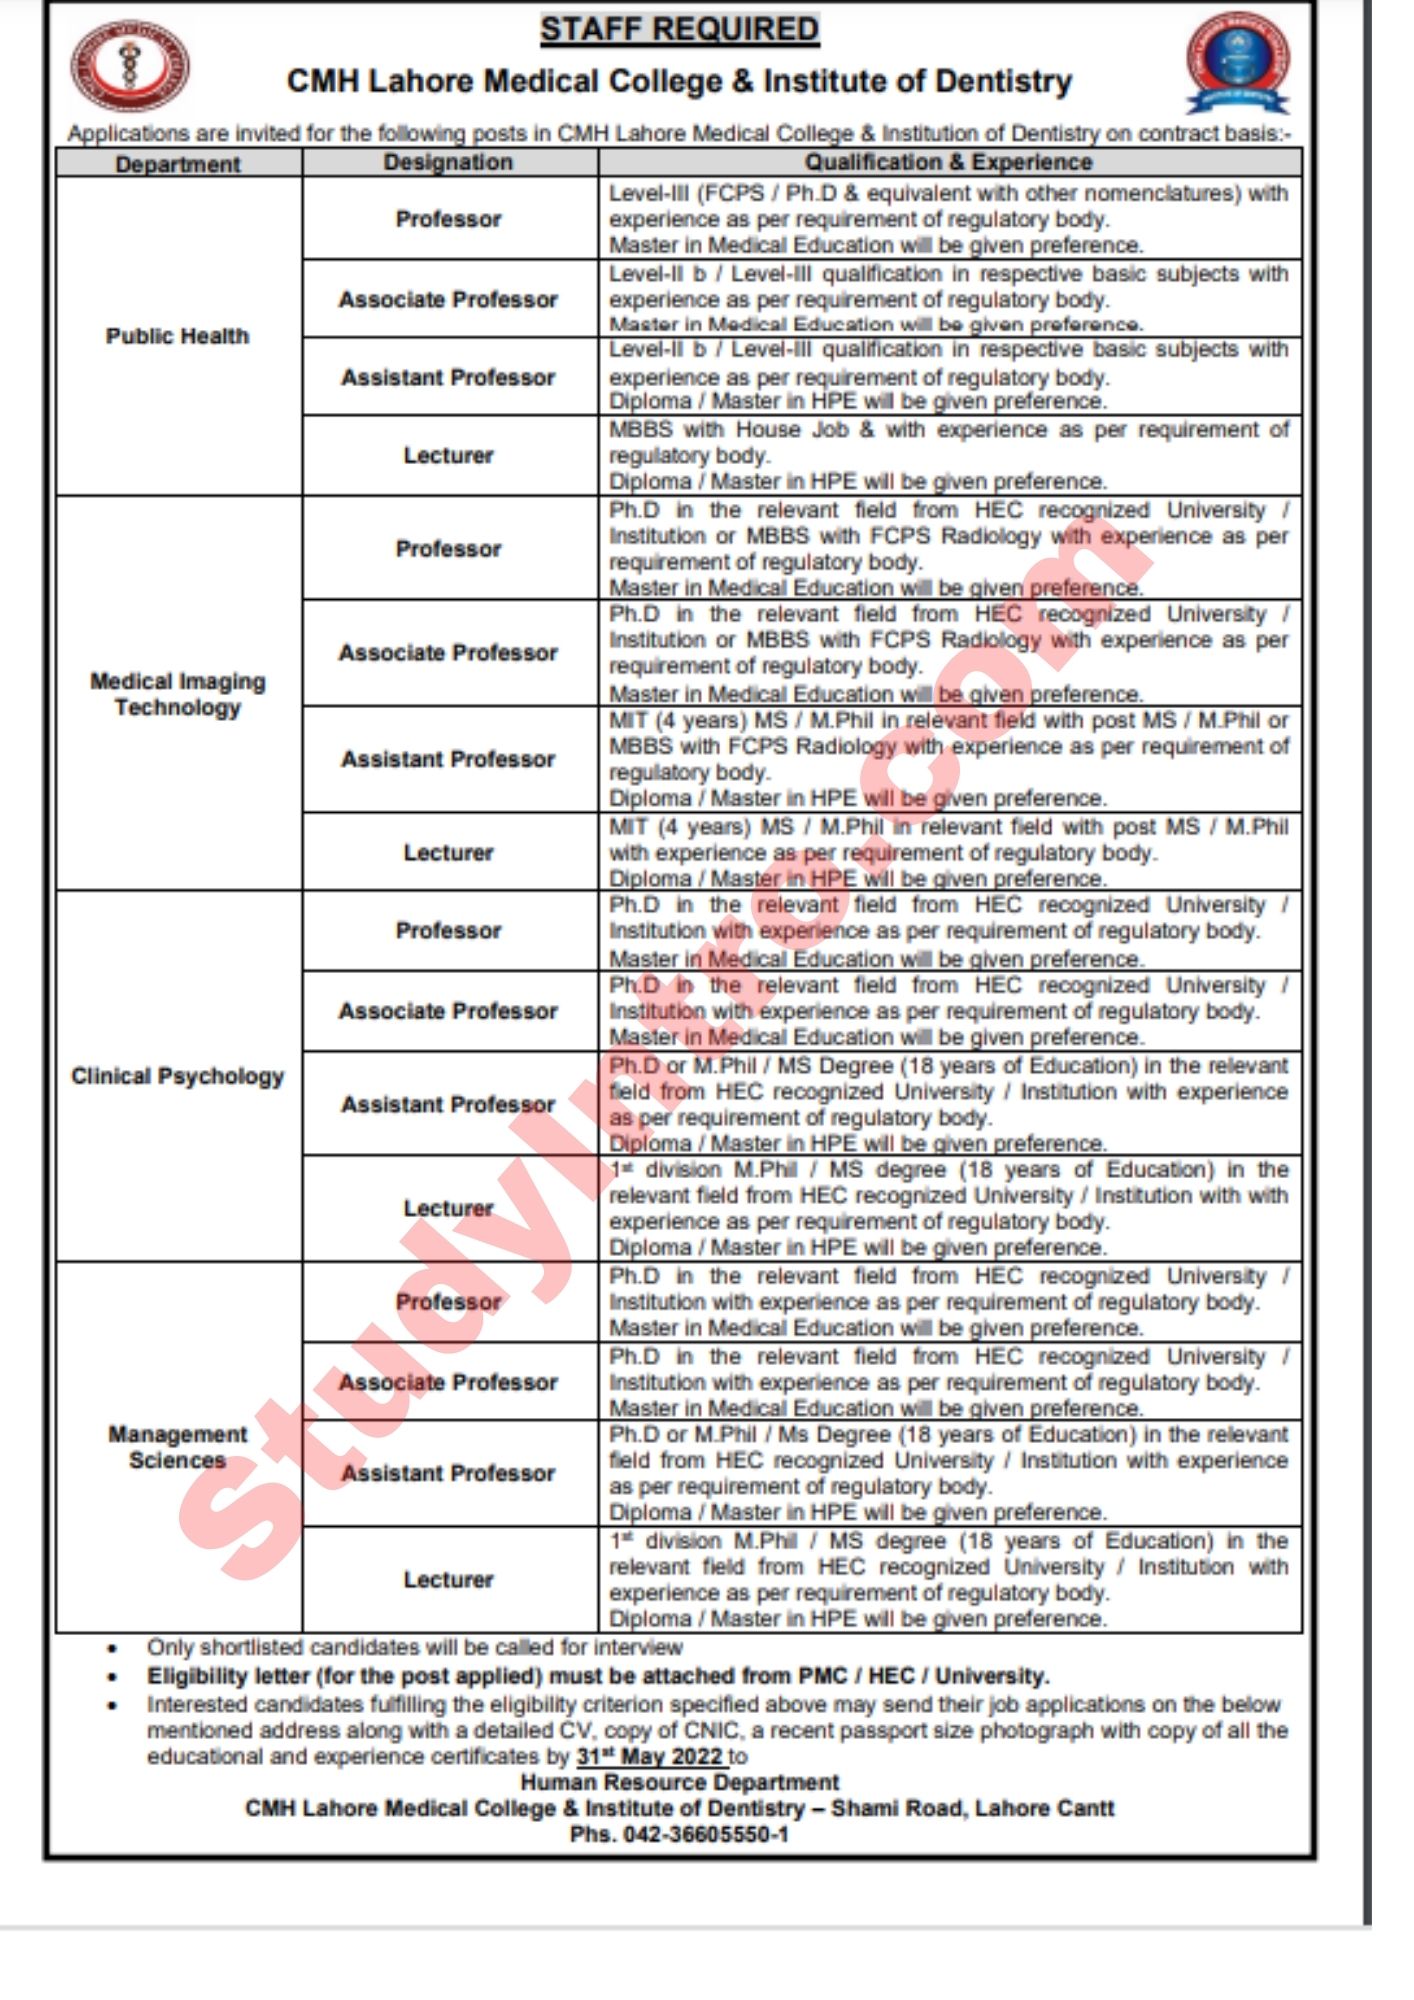 CMH Lahore Medical College Jobs 2022